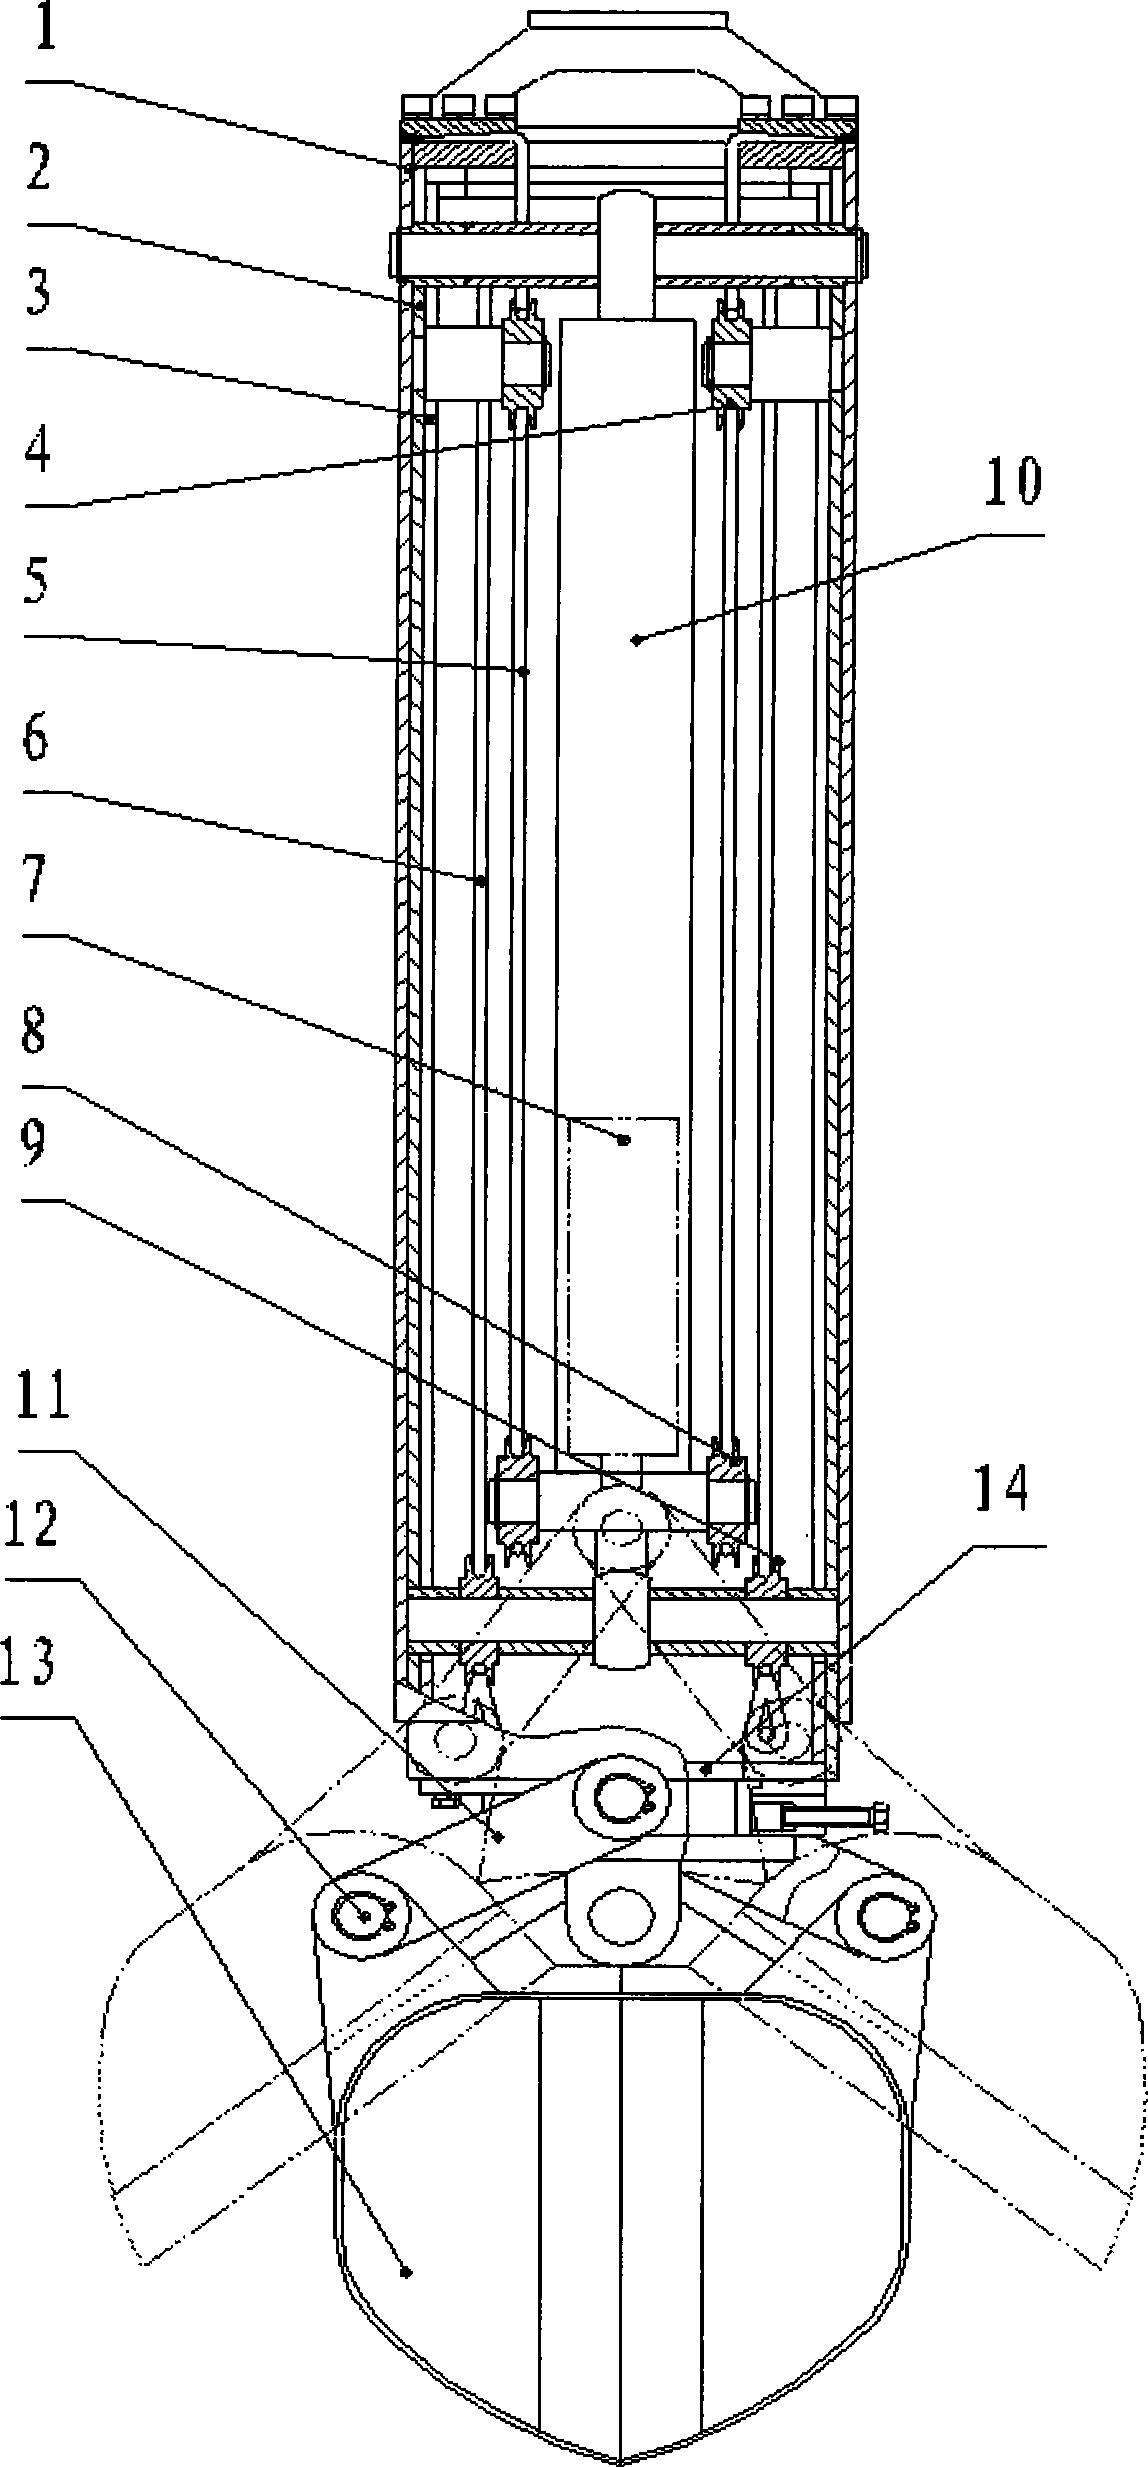 Deep mine clearing and digging device